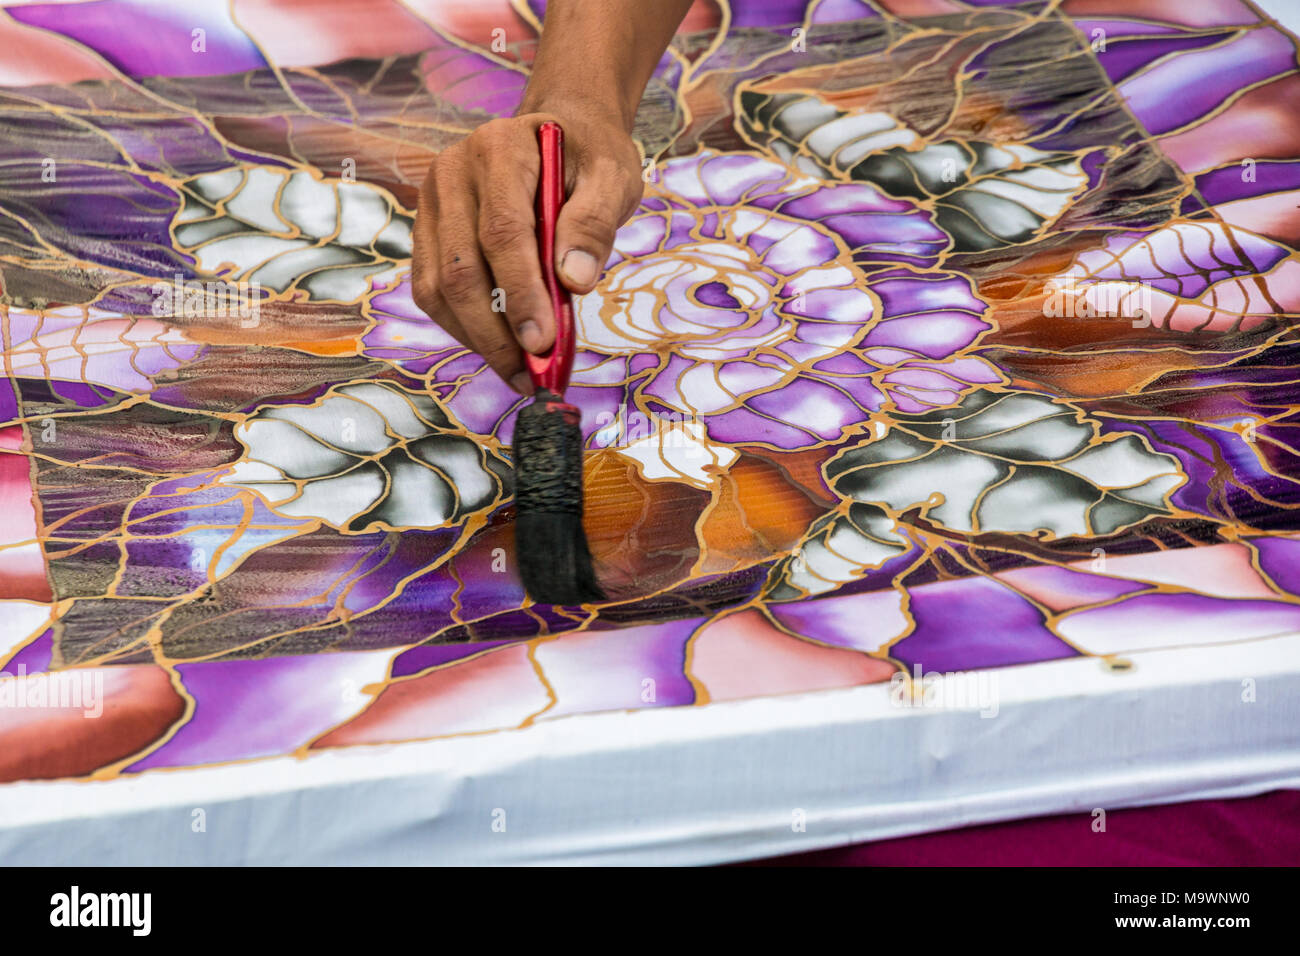 Close-up of a Malaysian batik craftsman teaching how to brush paint colours to a fabric with the popular motif of leaves and flowers. Stock Photo